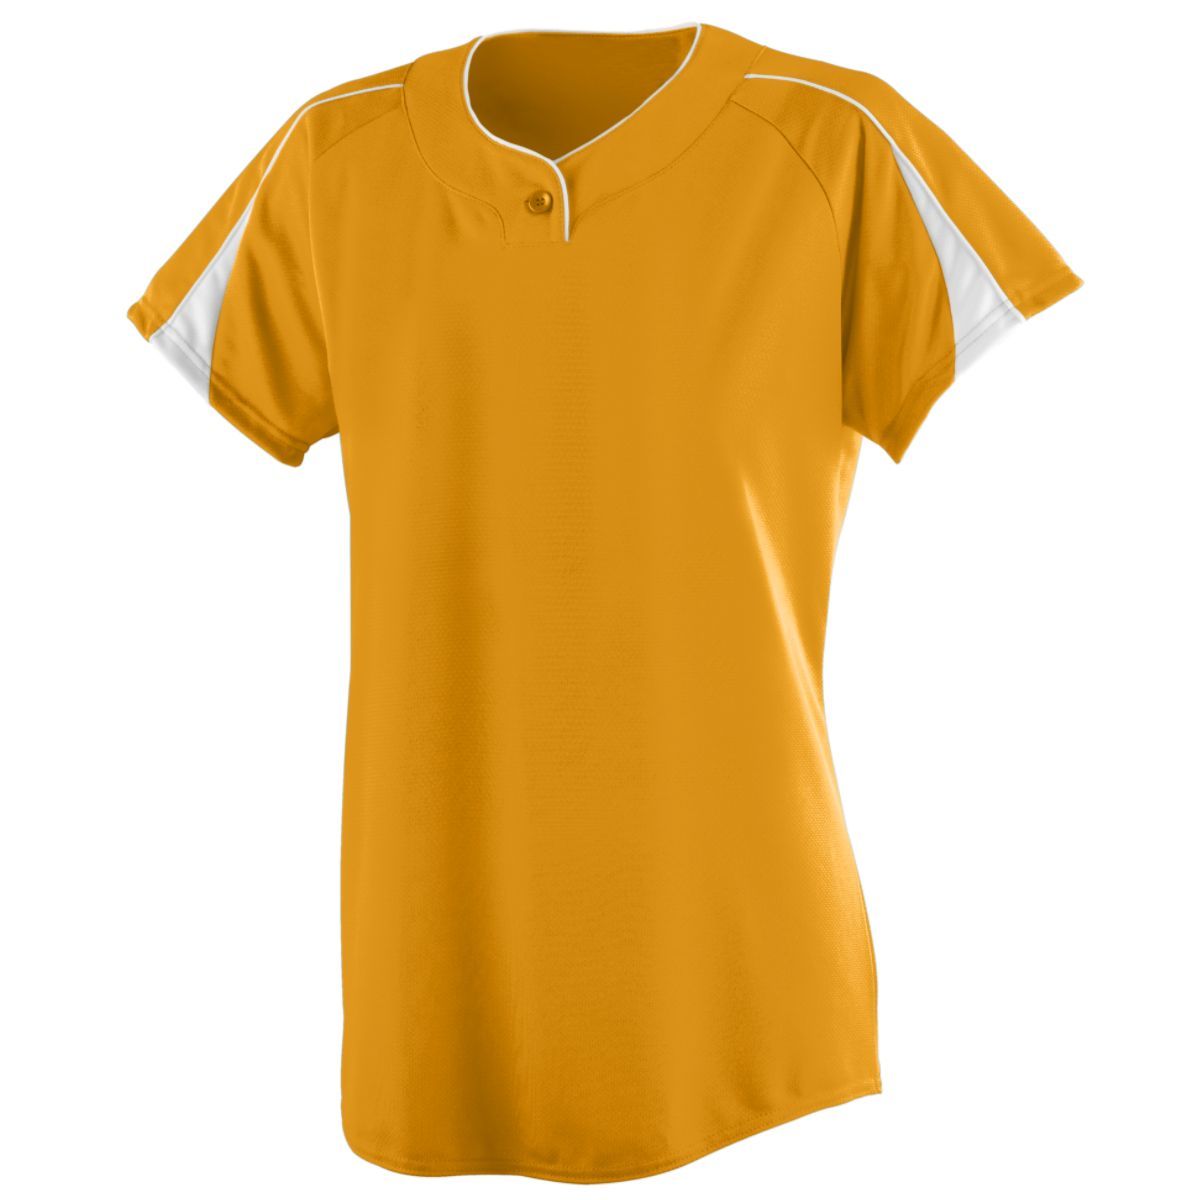 Augusta Sportswear Ladies Diamond Jersey in Gold/White  -Part of the Ladies, Ladies-Jersey, Augusta-Products, Softball, Shirts product lines at KanaleyCreations.com